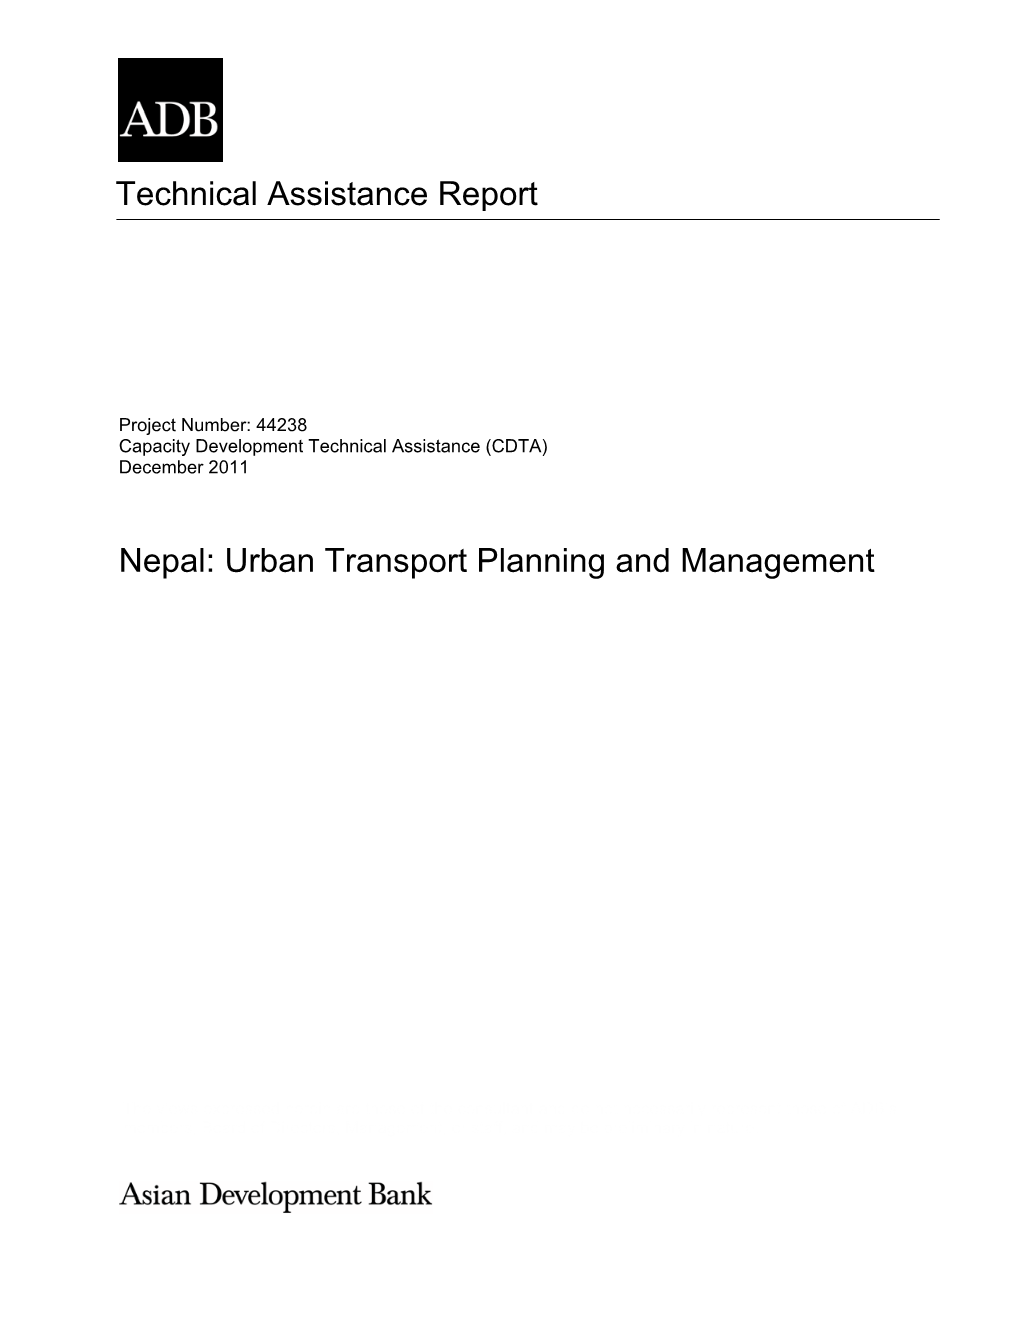 Nepal, Urban Transport Planning and Management